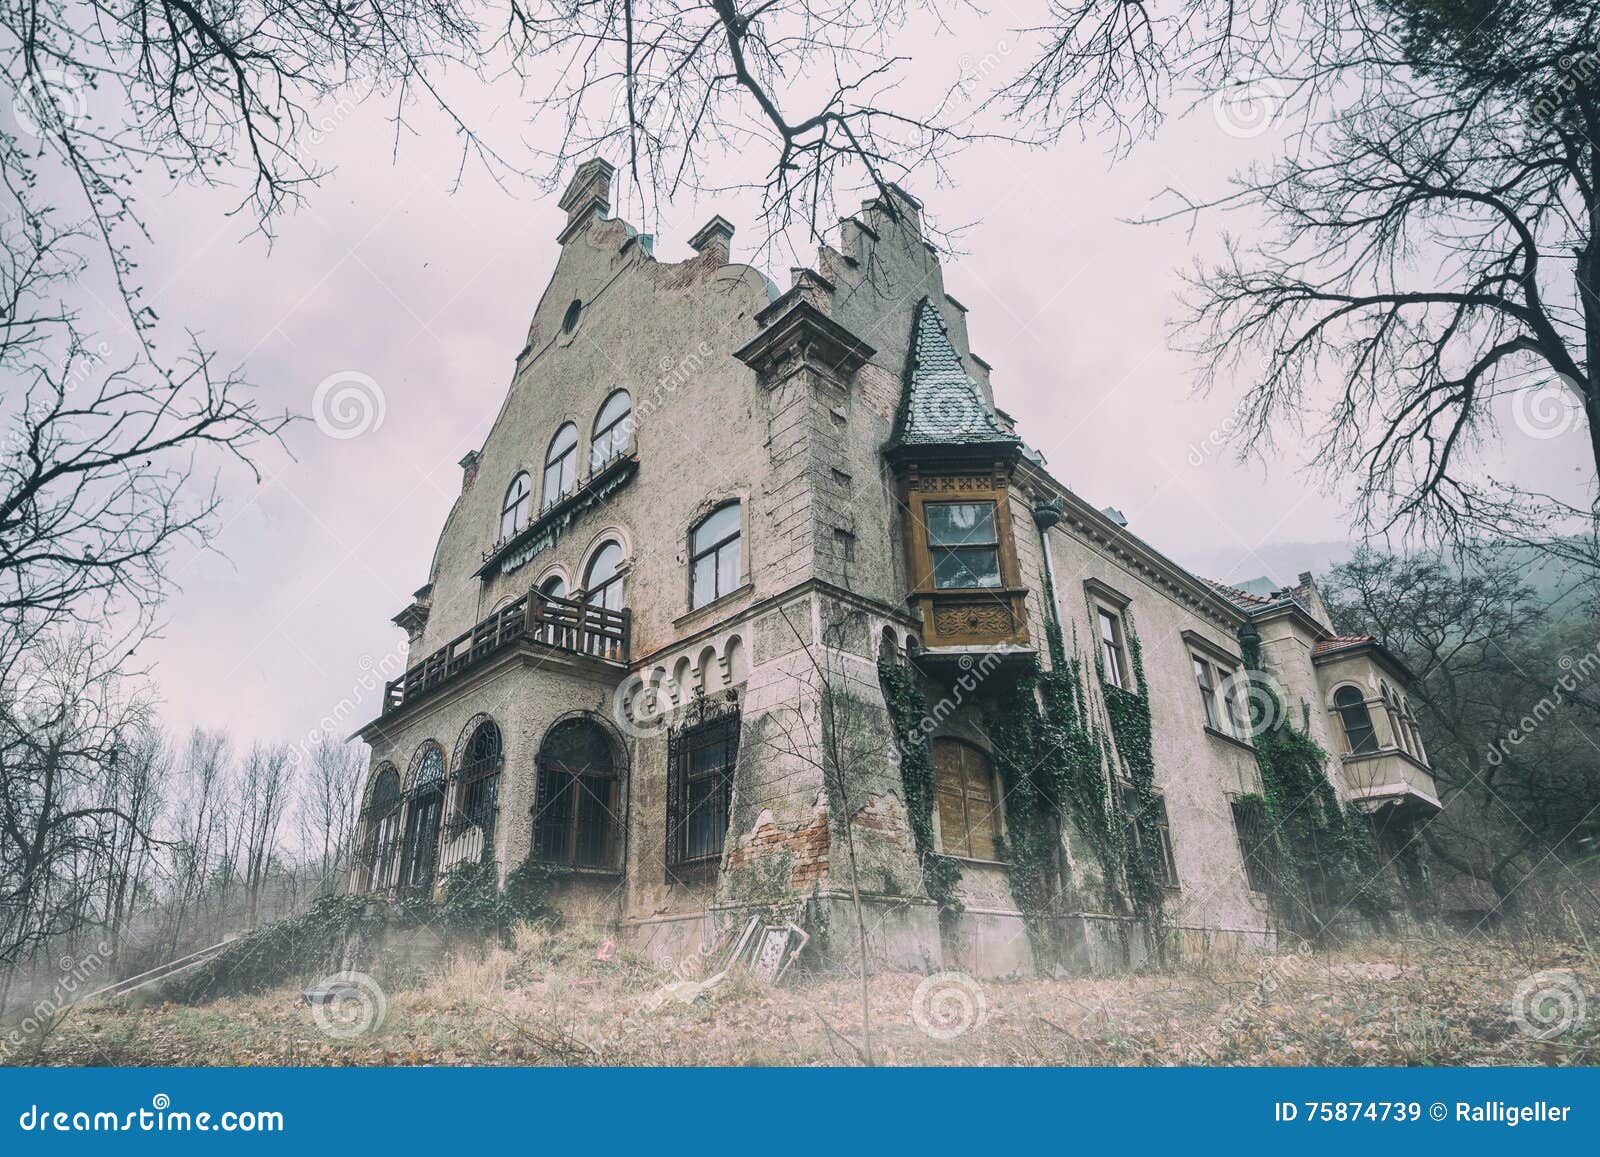 old abandoned mansion in mystic spooky forest